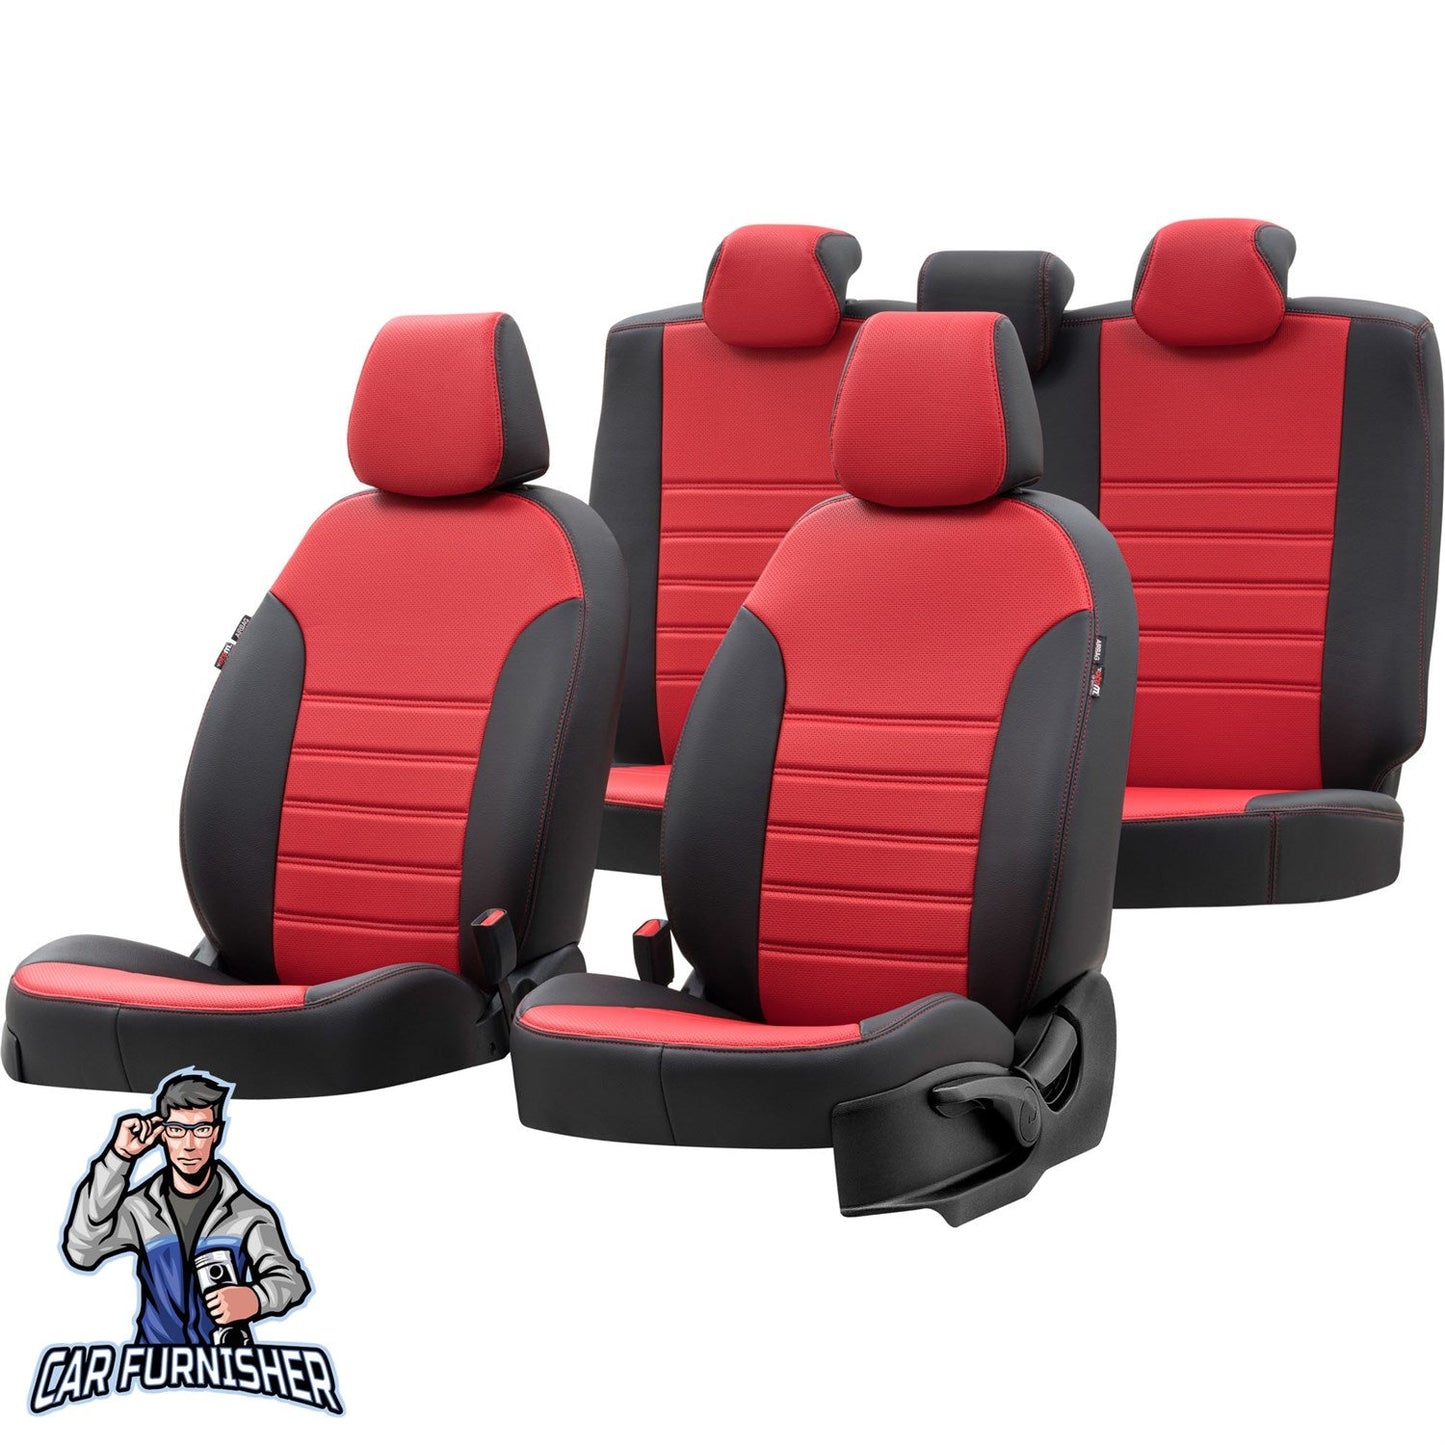 Volkswagen Scirocco Seat Cover New York Leather Design Red Leather